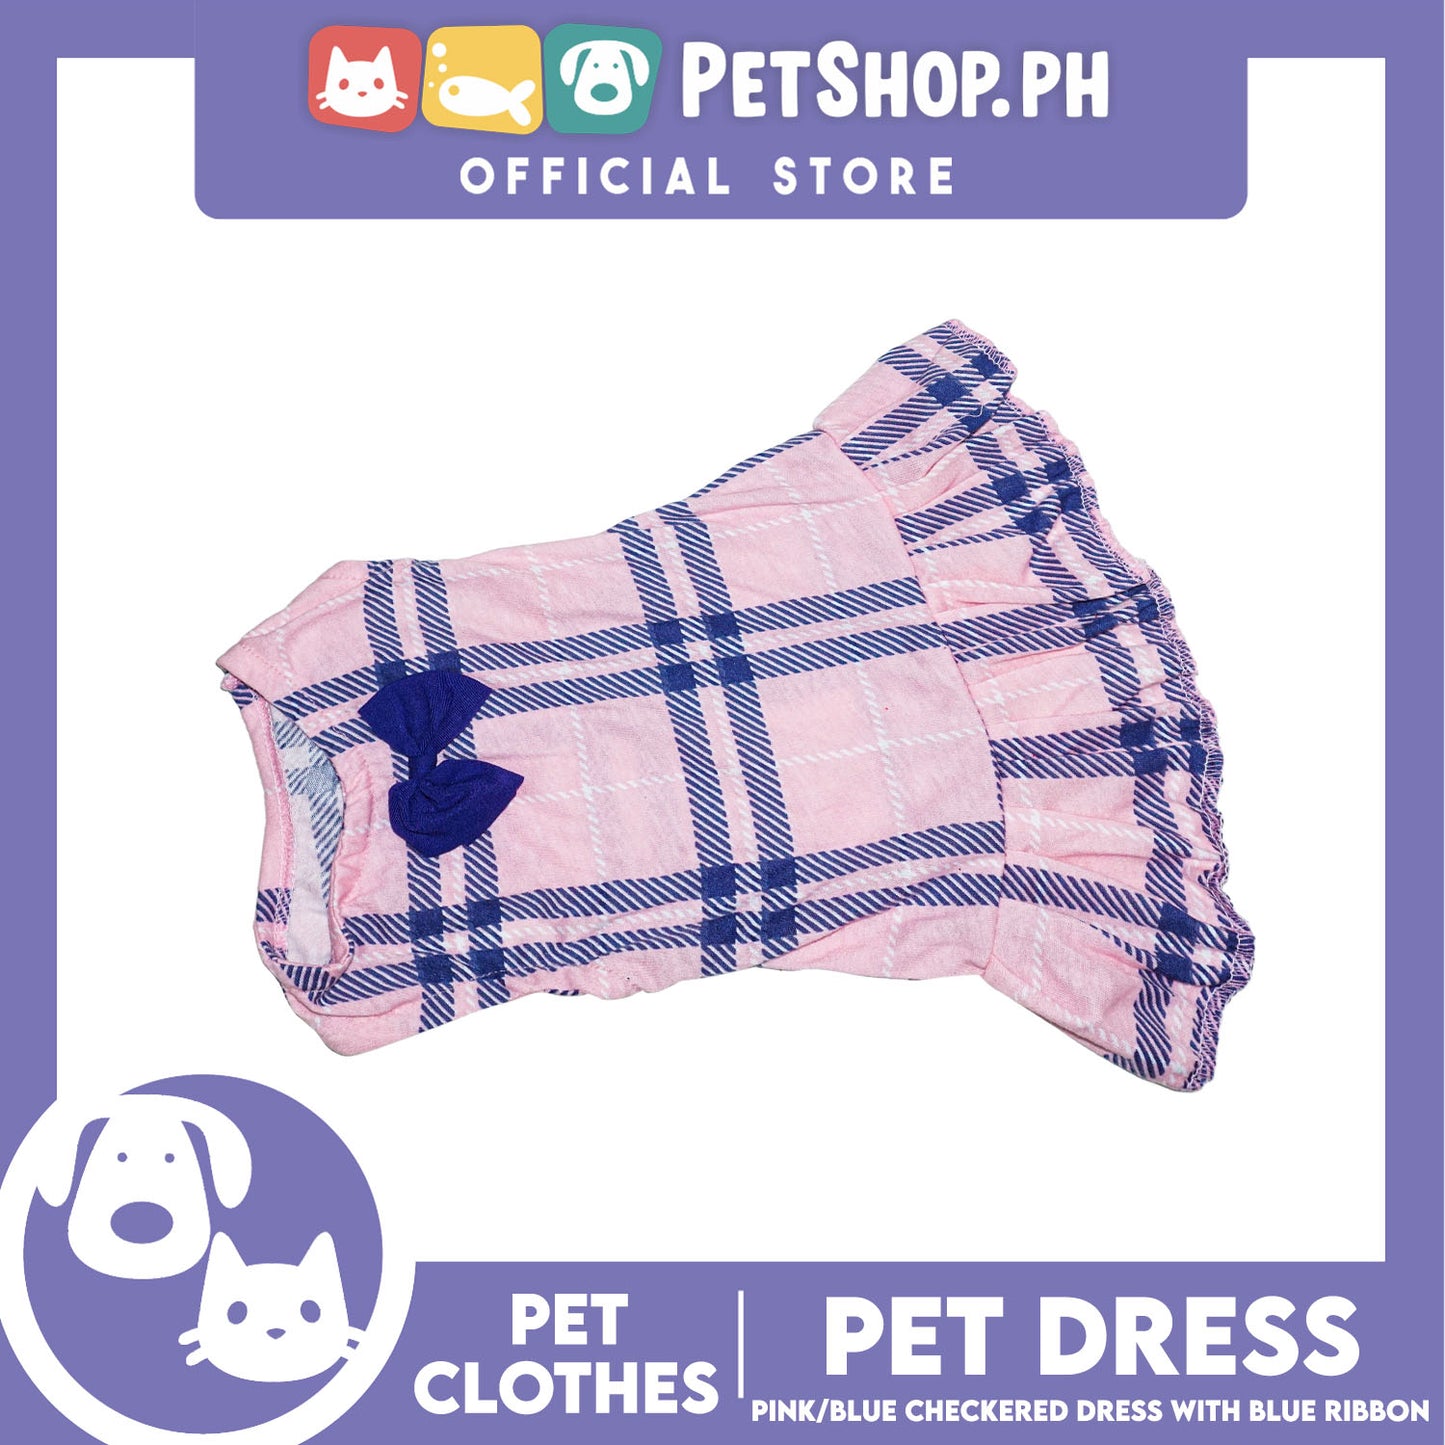 Pet Dress Pink/Blue Checkered Dress with Blue Ribbon (Large) Perfect Fit for Dogs and Cats